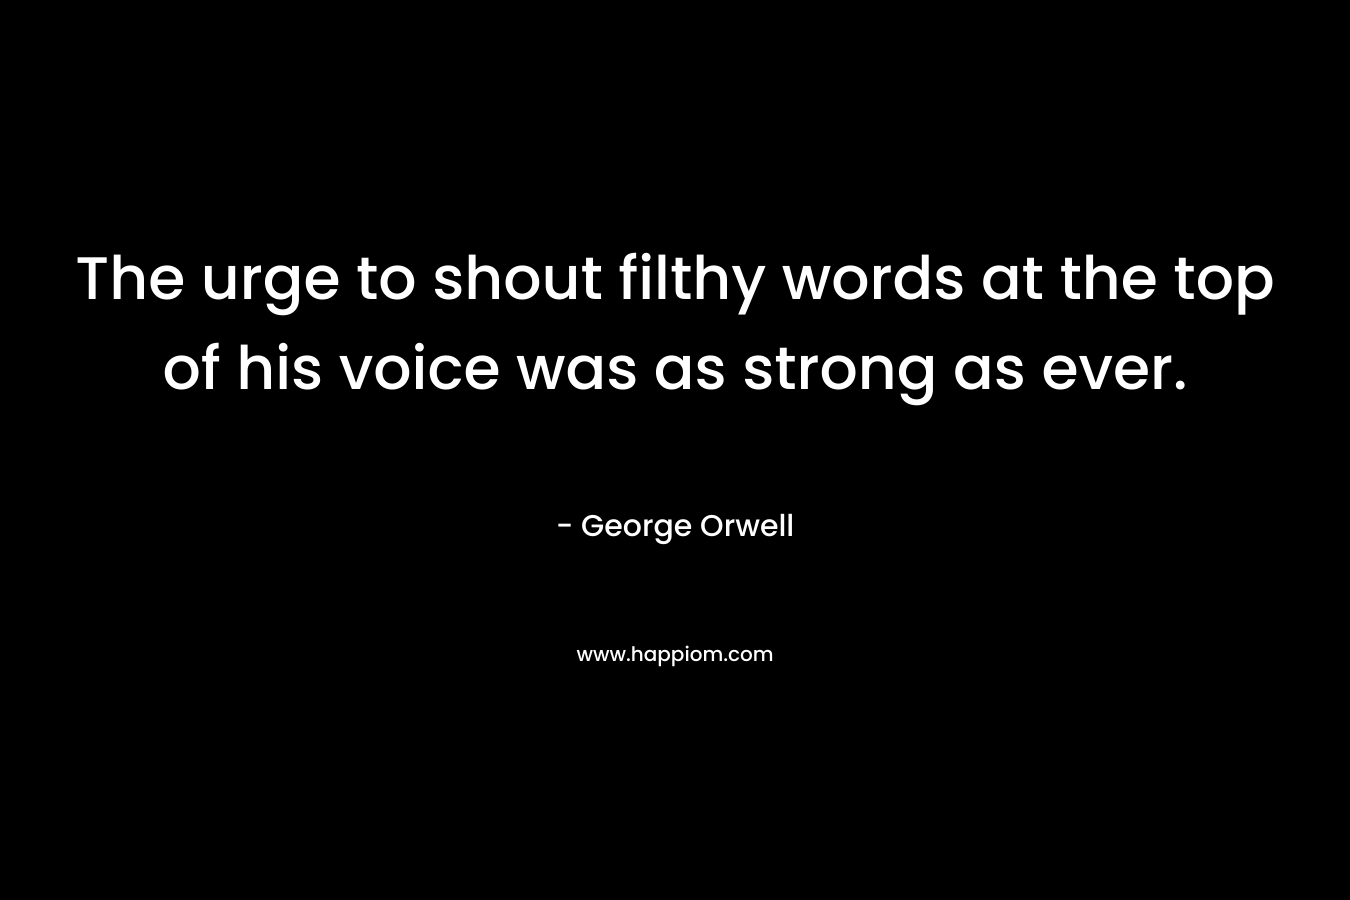 The urge to shout filthy words at the top of his voice was as strong as ever. – George Orwell